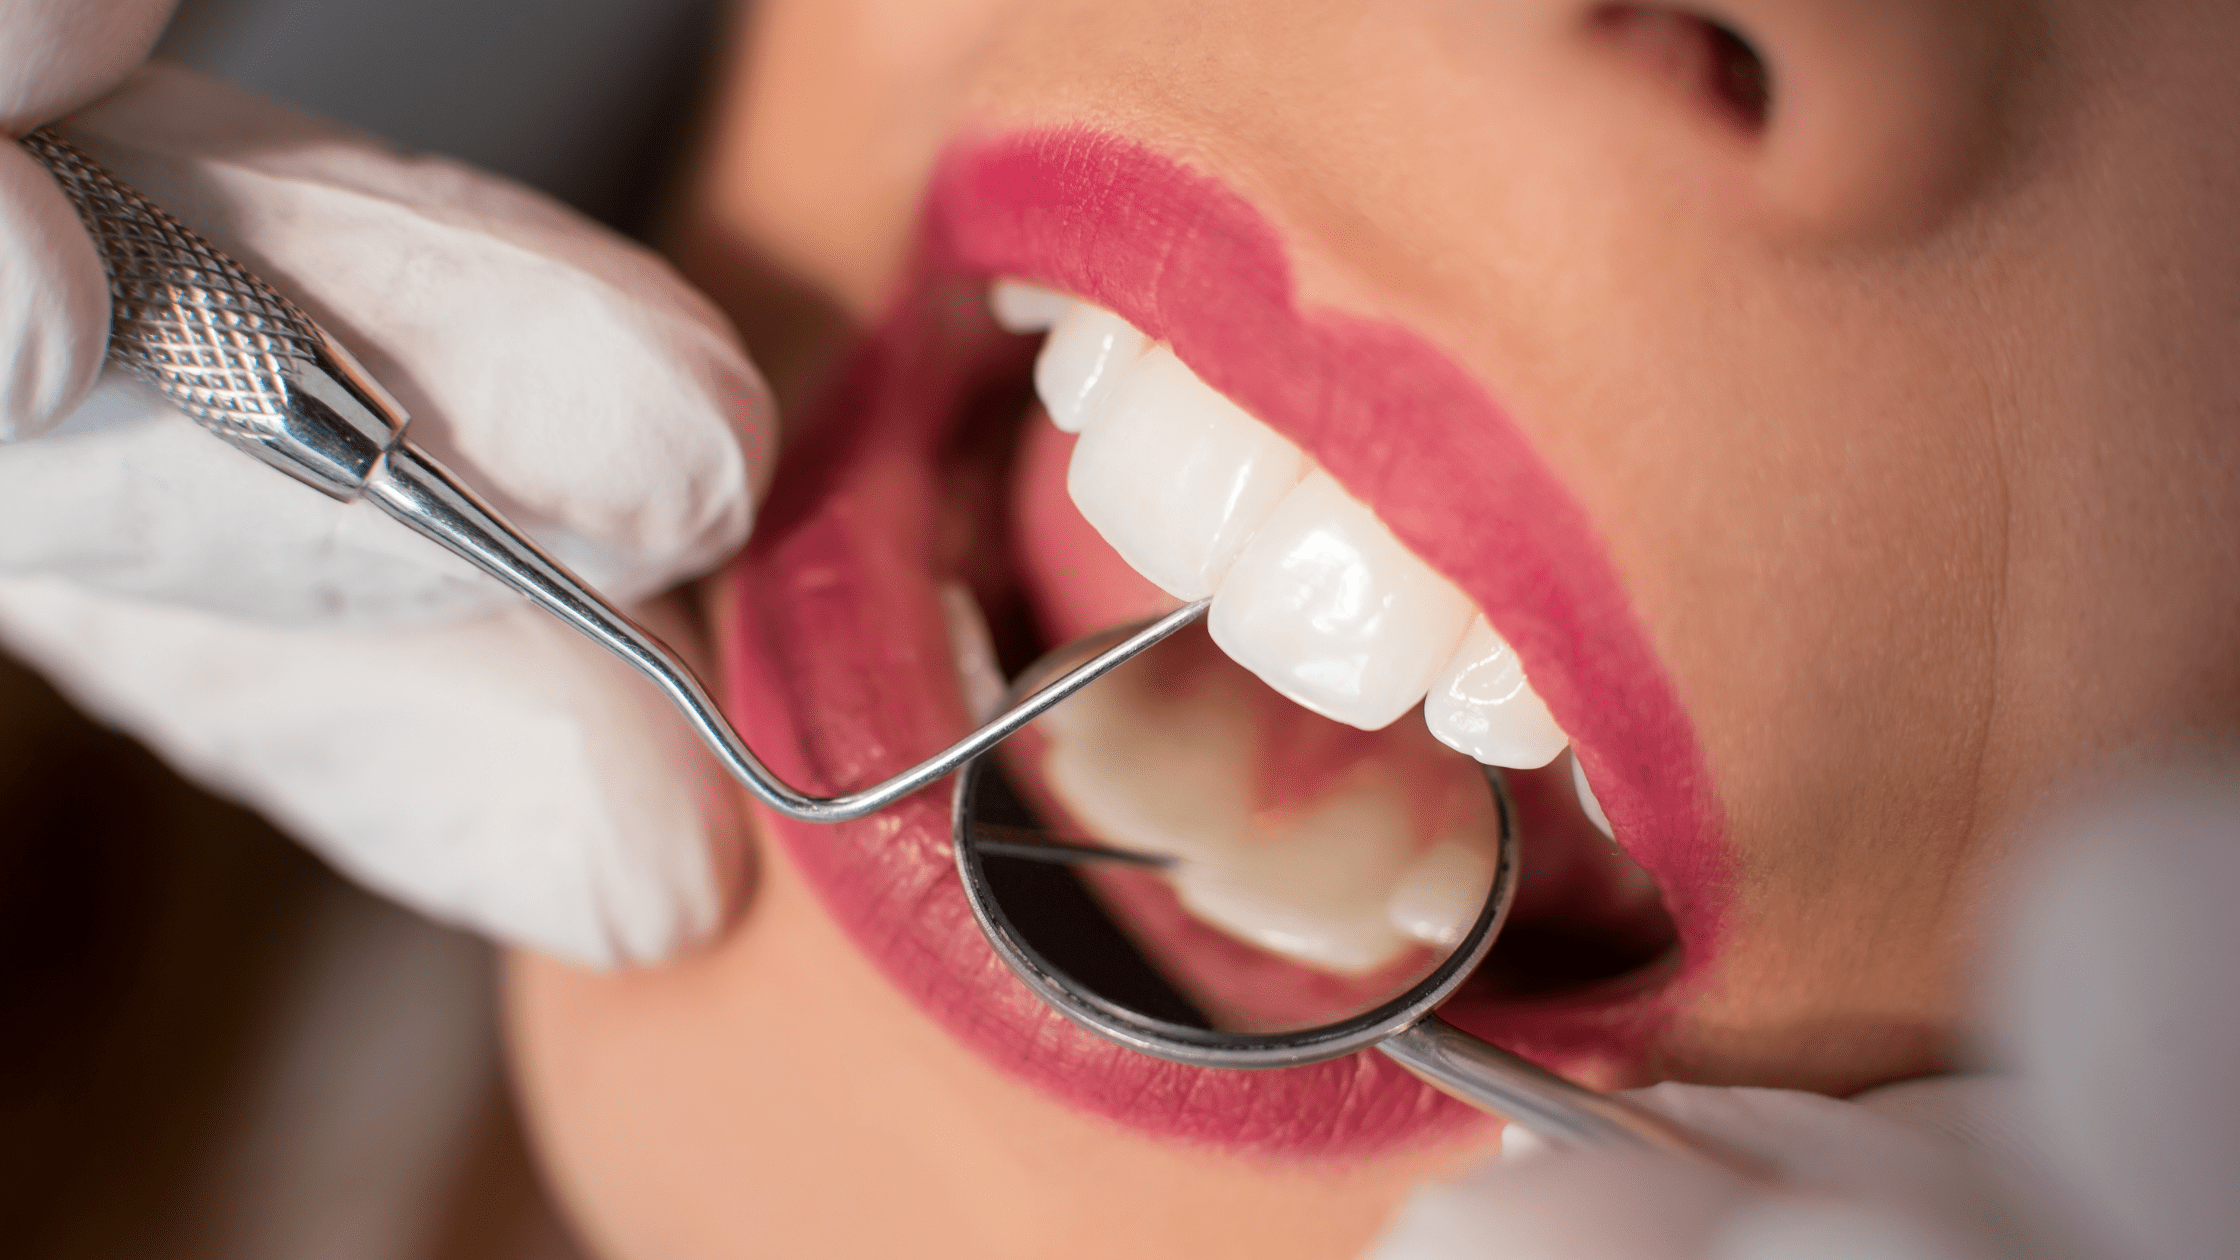 Plaque and tartar: how to prevent buildup on teeth 🦷